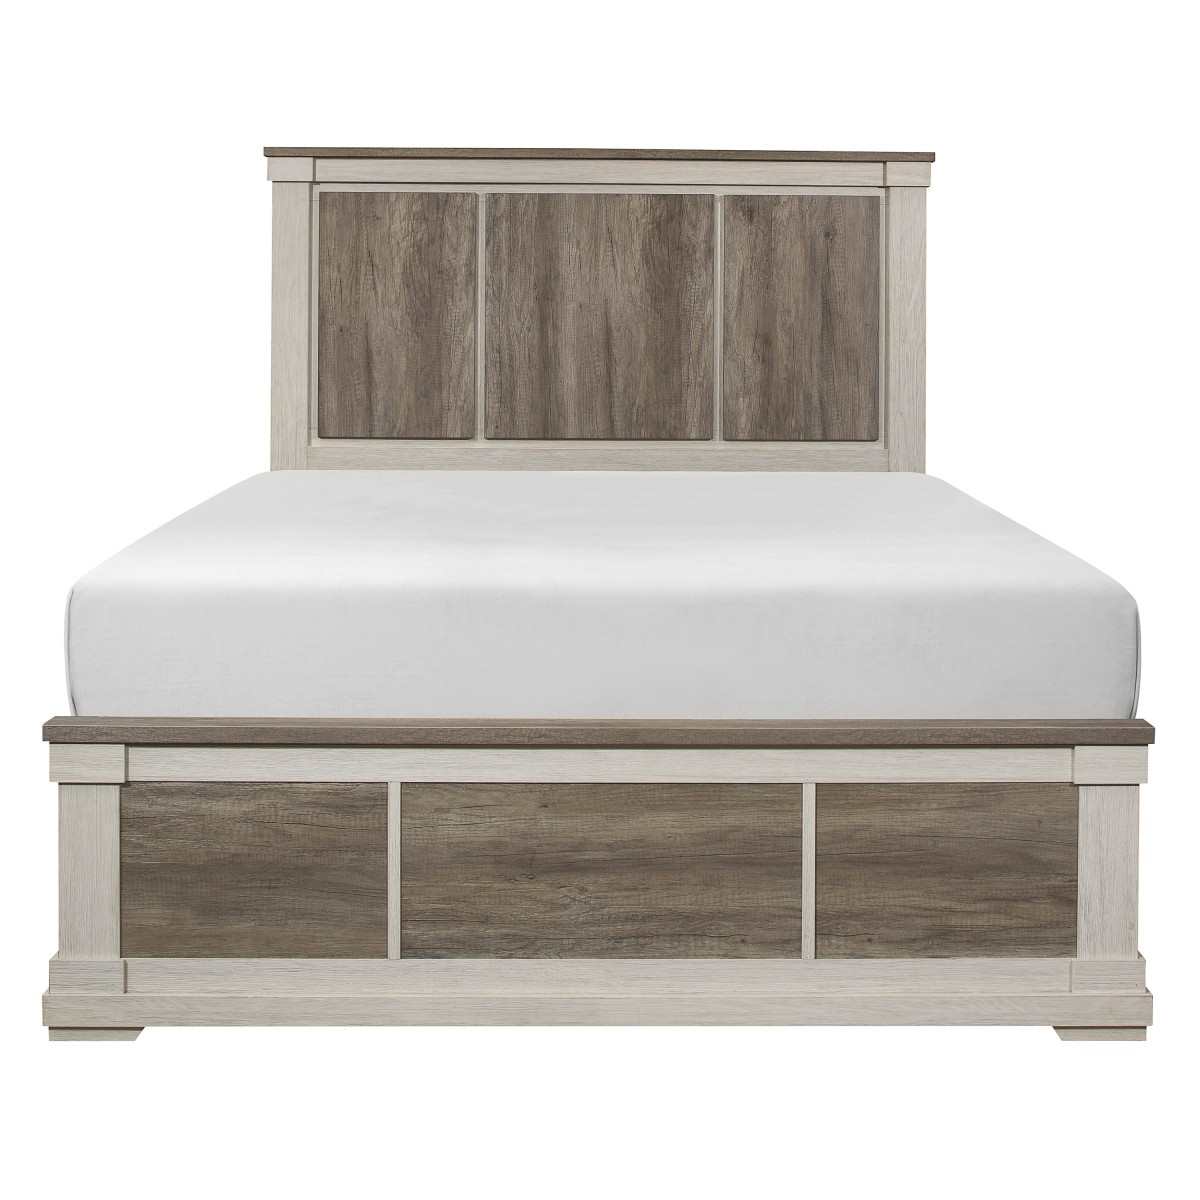 Arcadia Bedroom Collection 1677